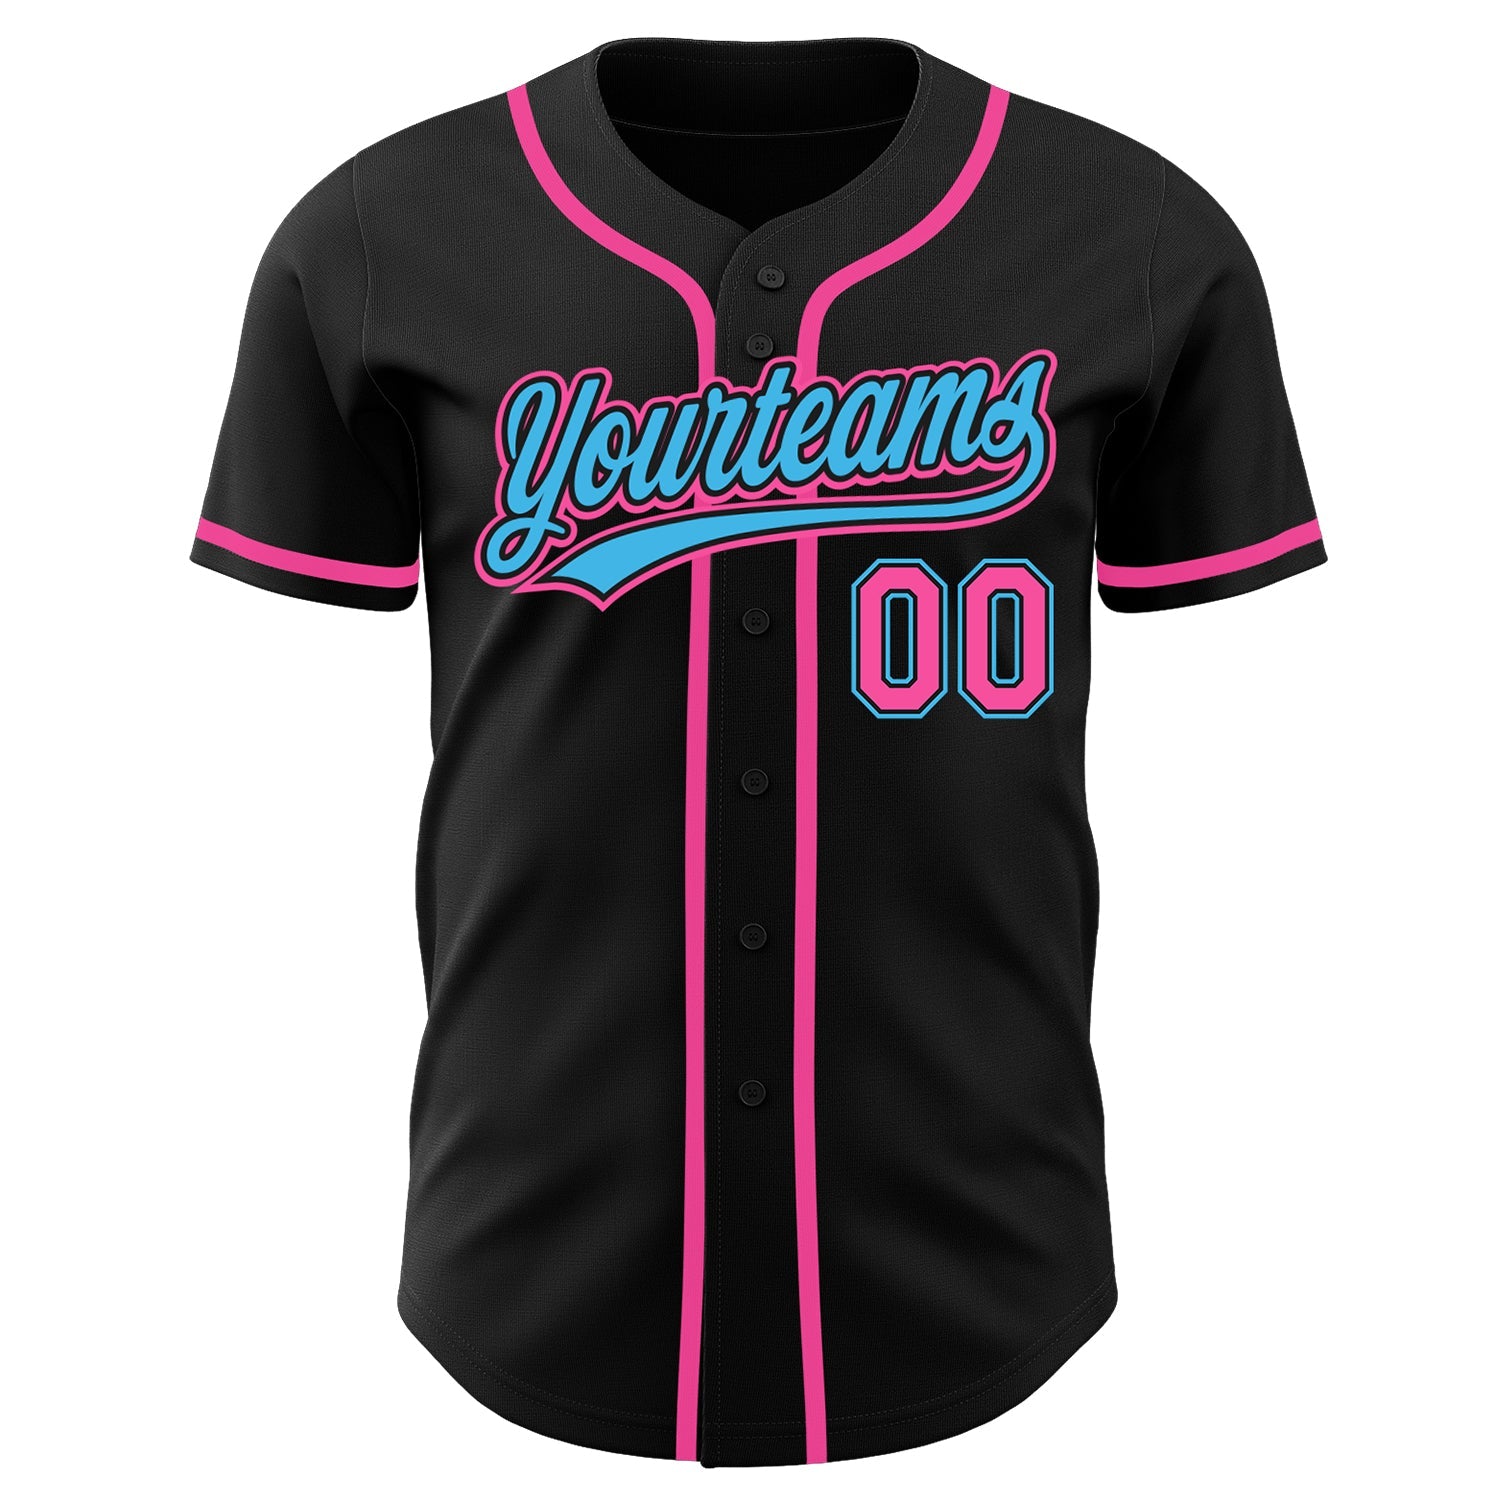 jersey design pink and black